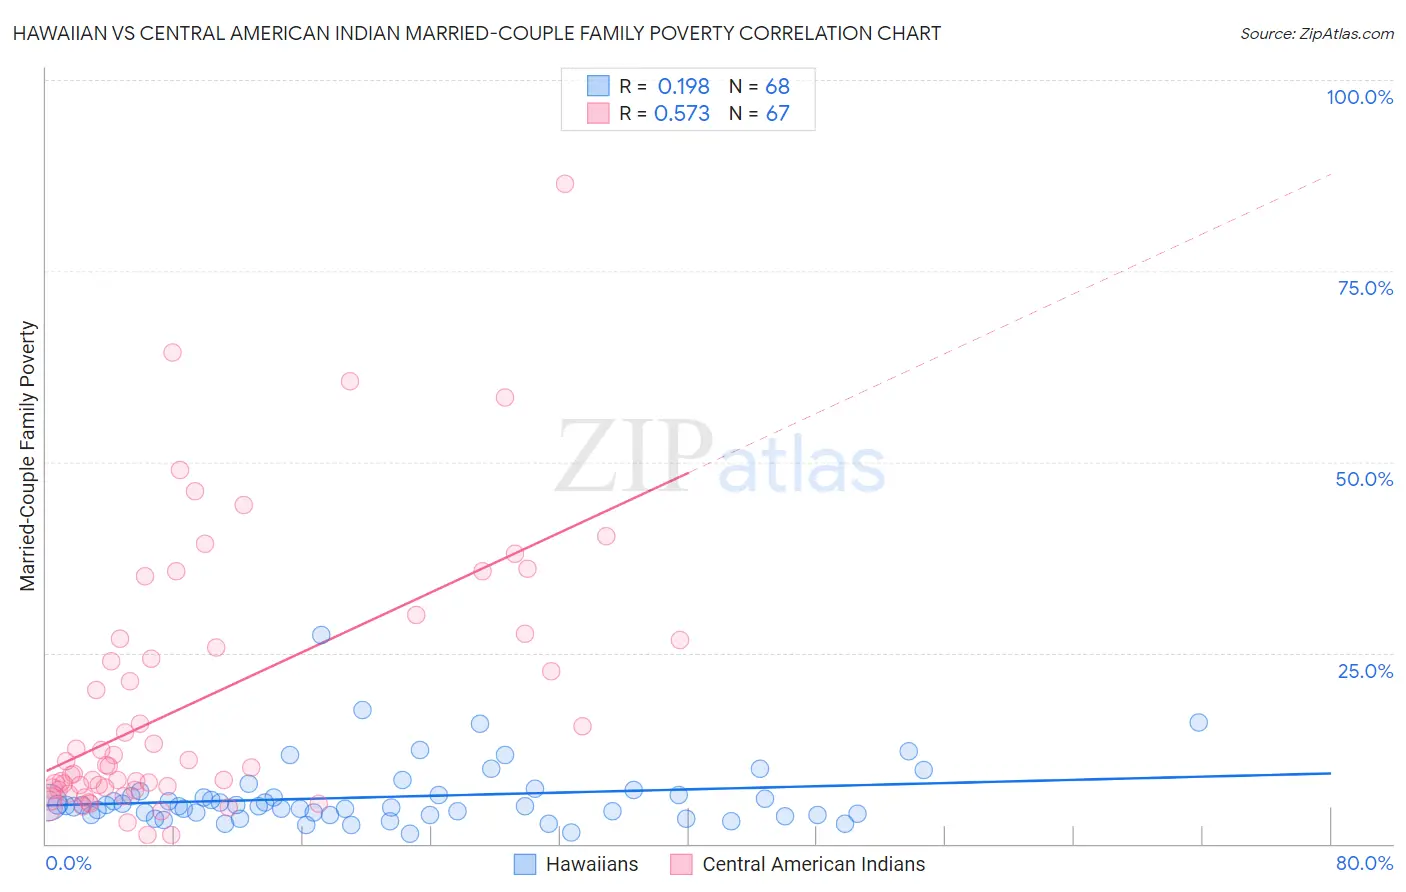 Hawaiian vs Central American Indian Married-Couple Family Poverty